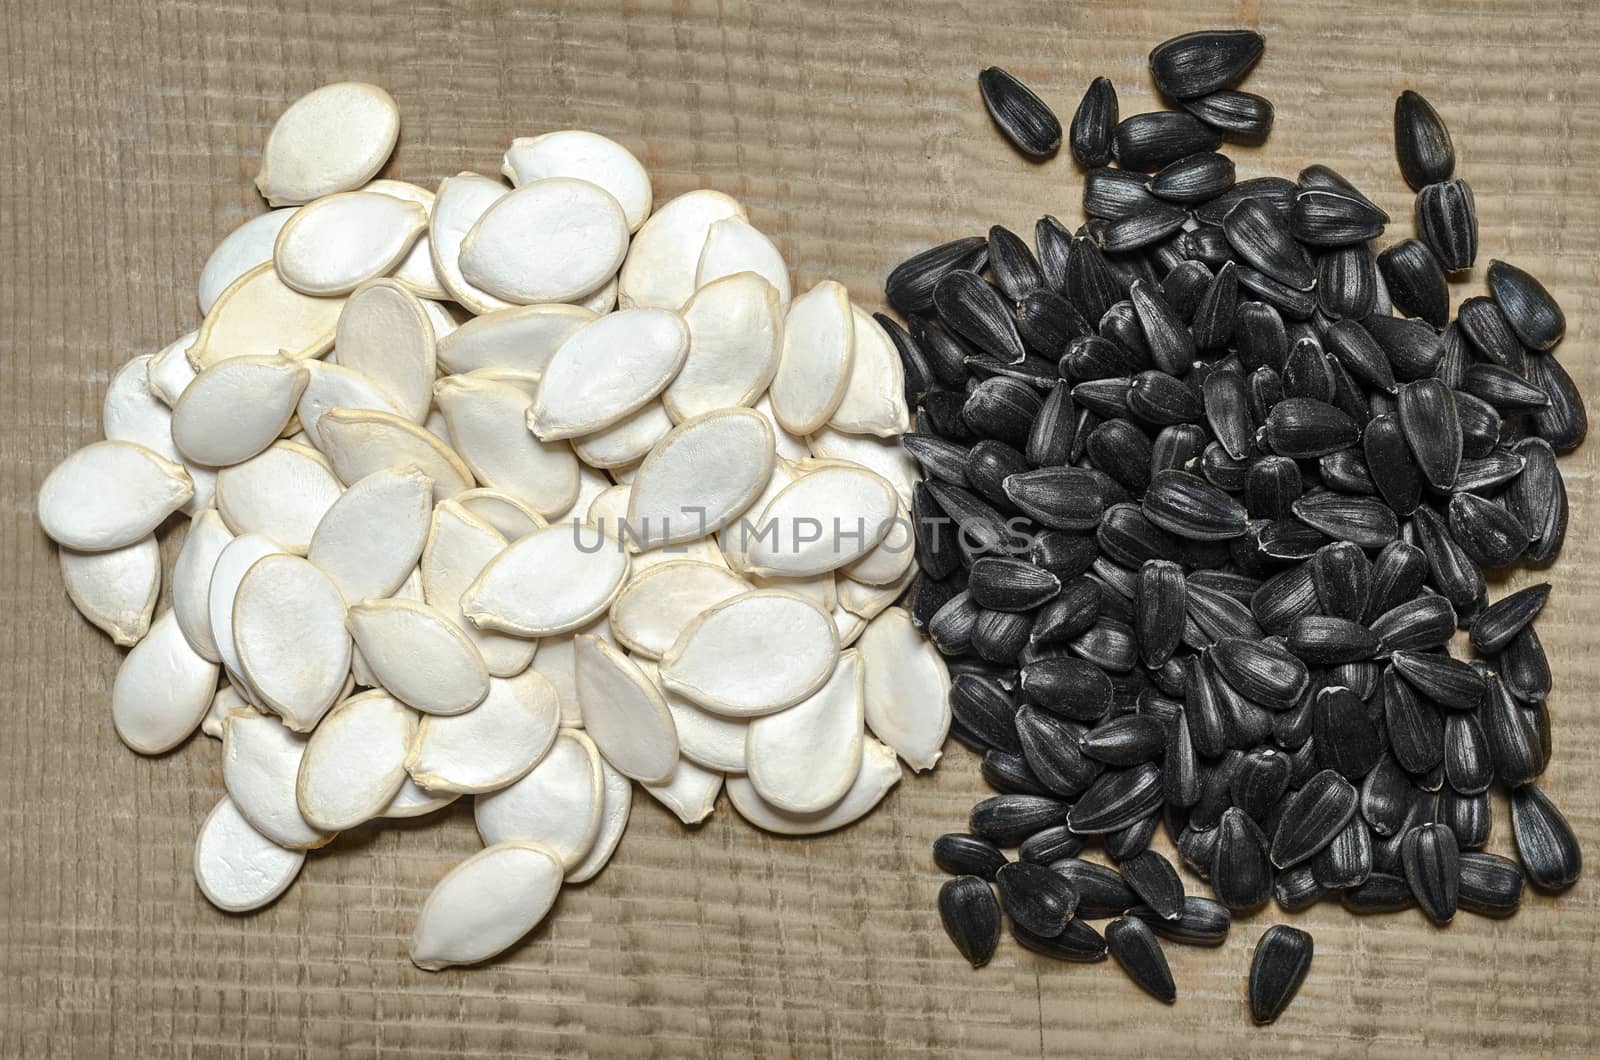 Pumpkin seeds and sunflower seeds, lying on the wooden background is not cleared